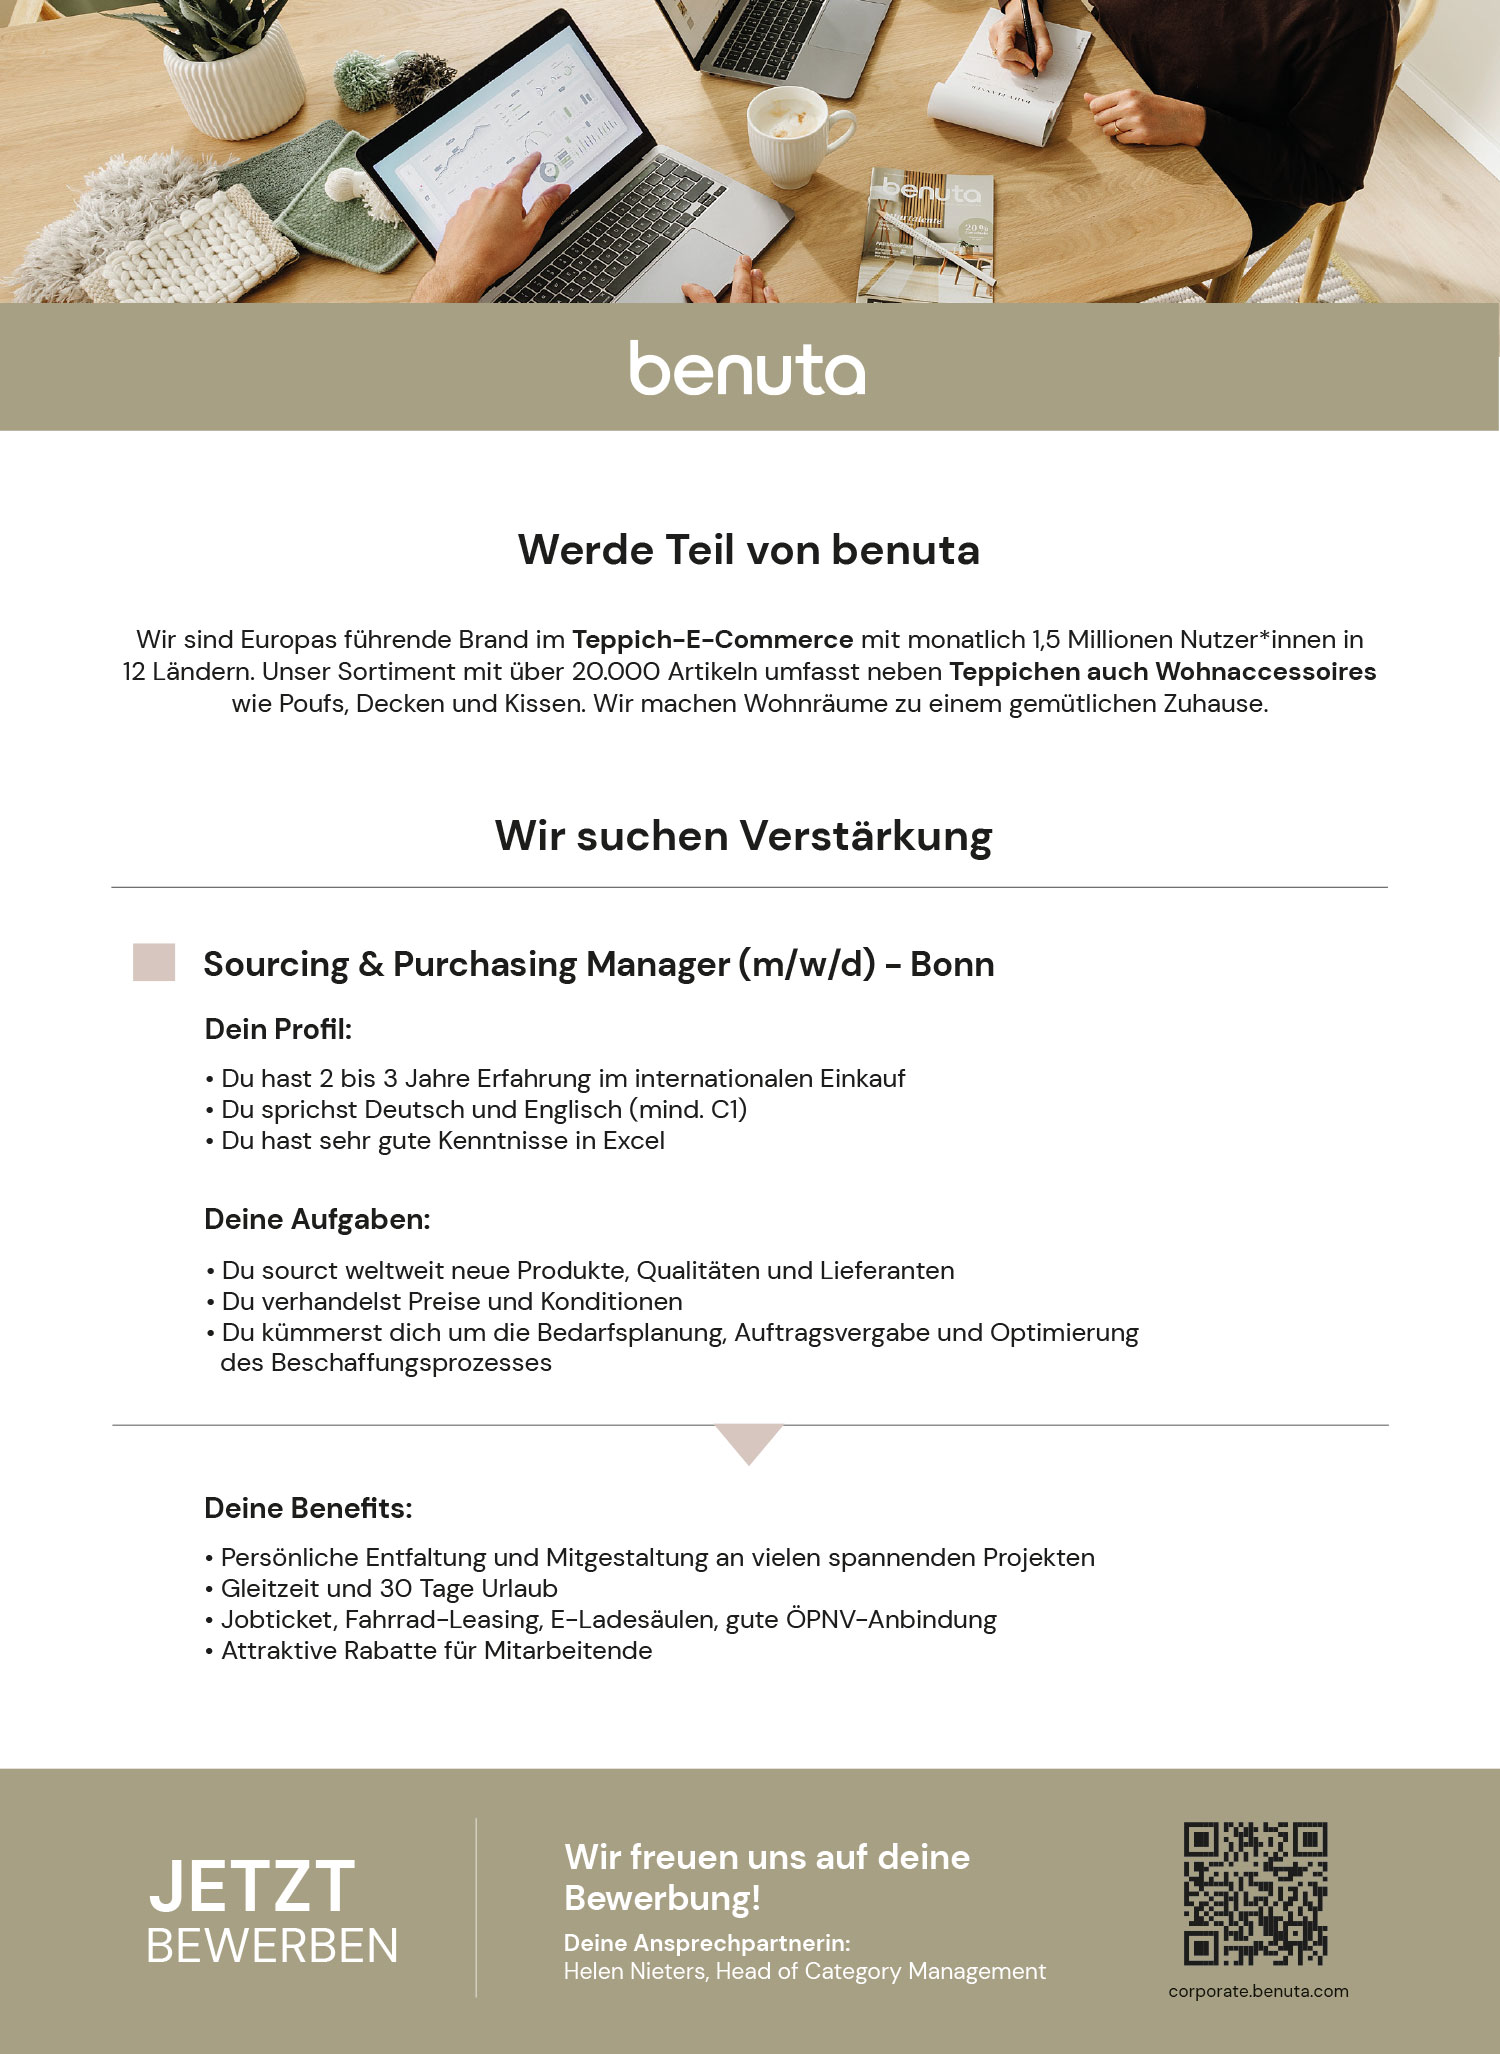 Sourcing & Purchasing Manager (m/w/d) für Teppich-E-Commerce